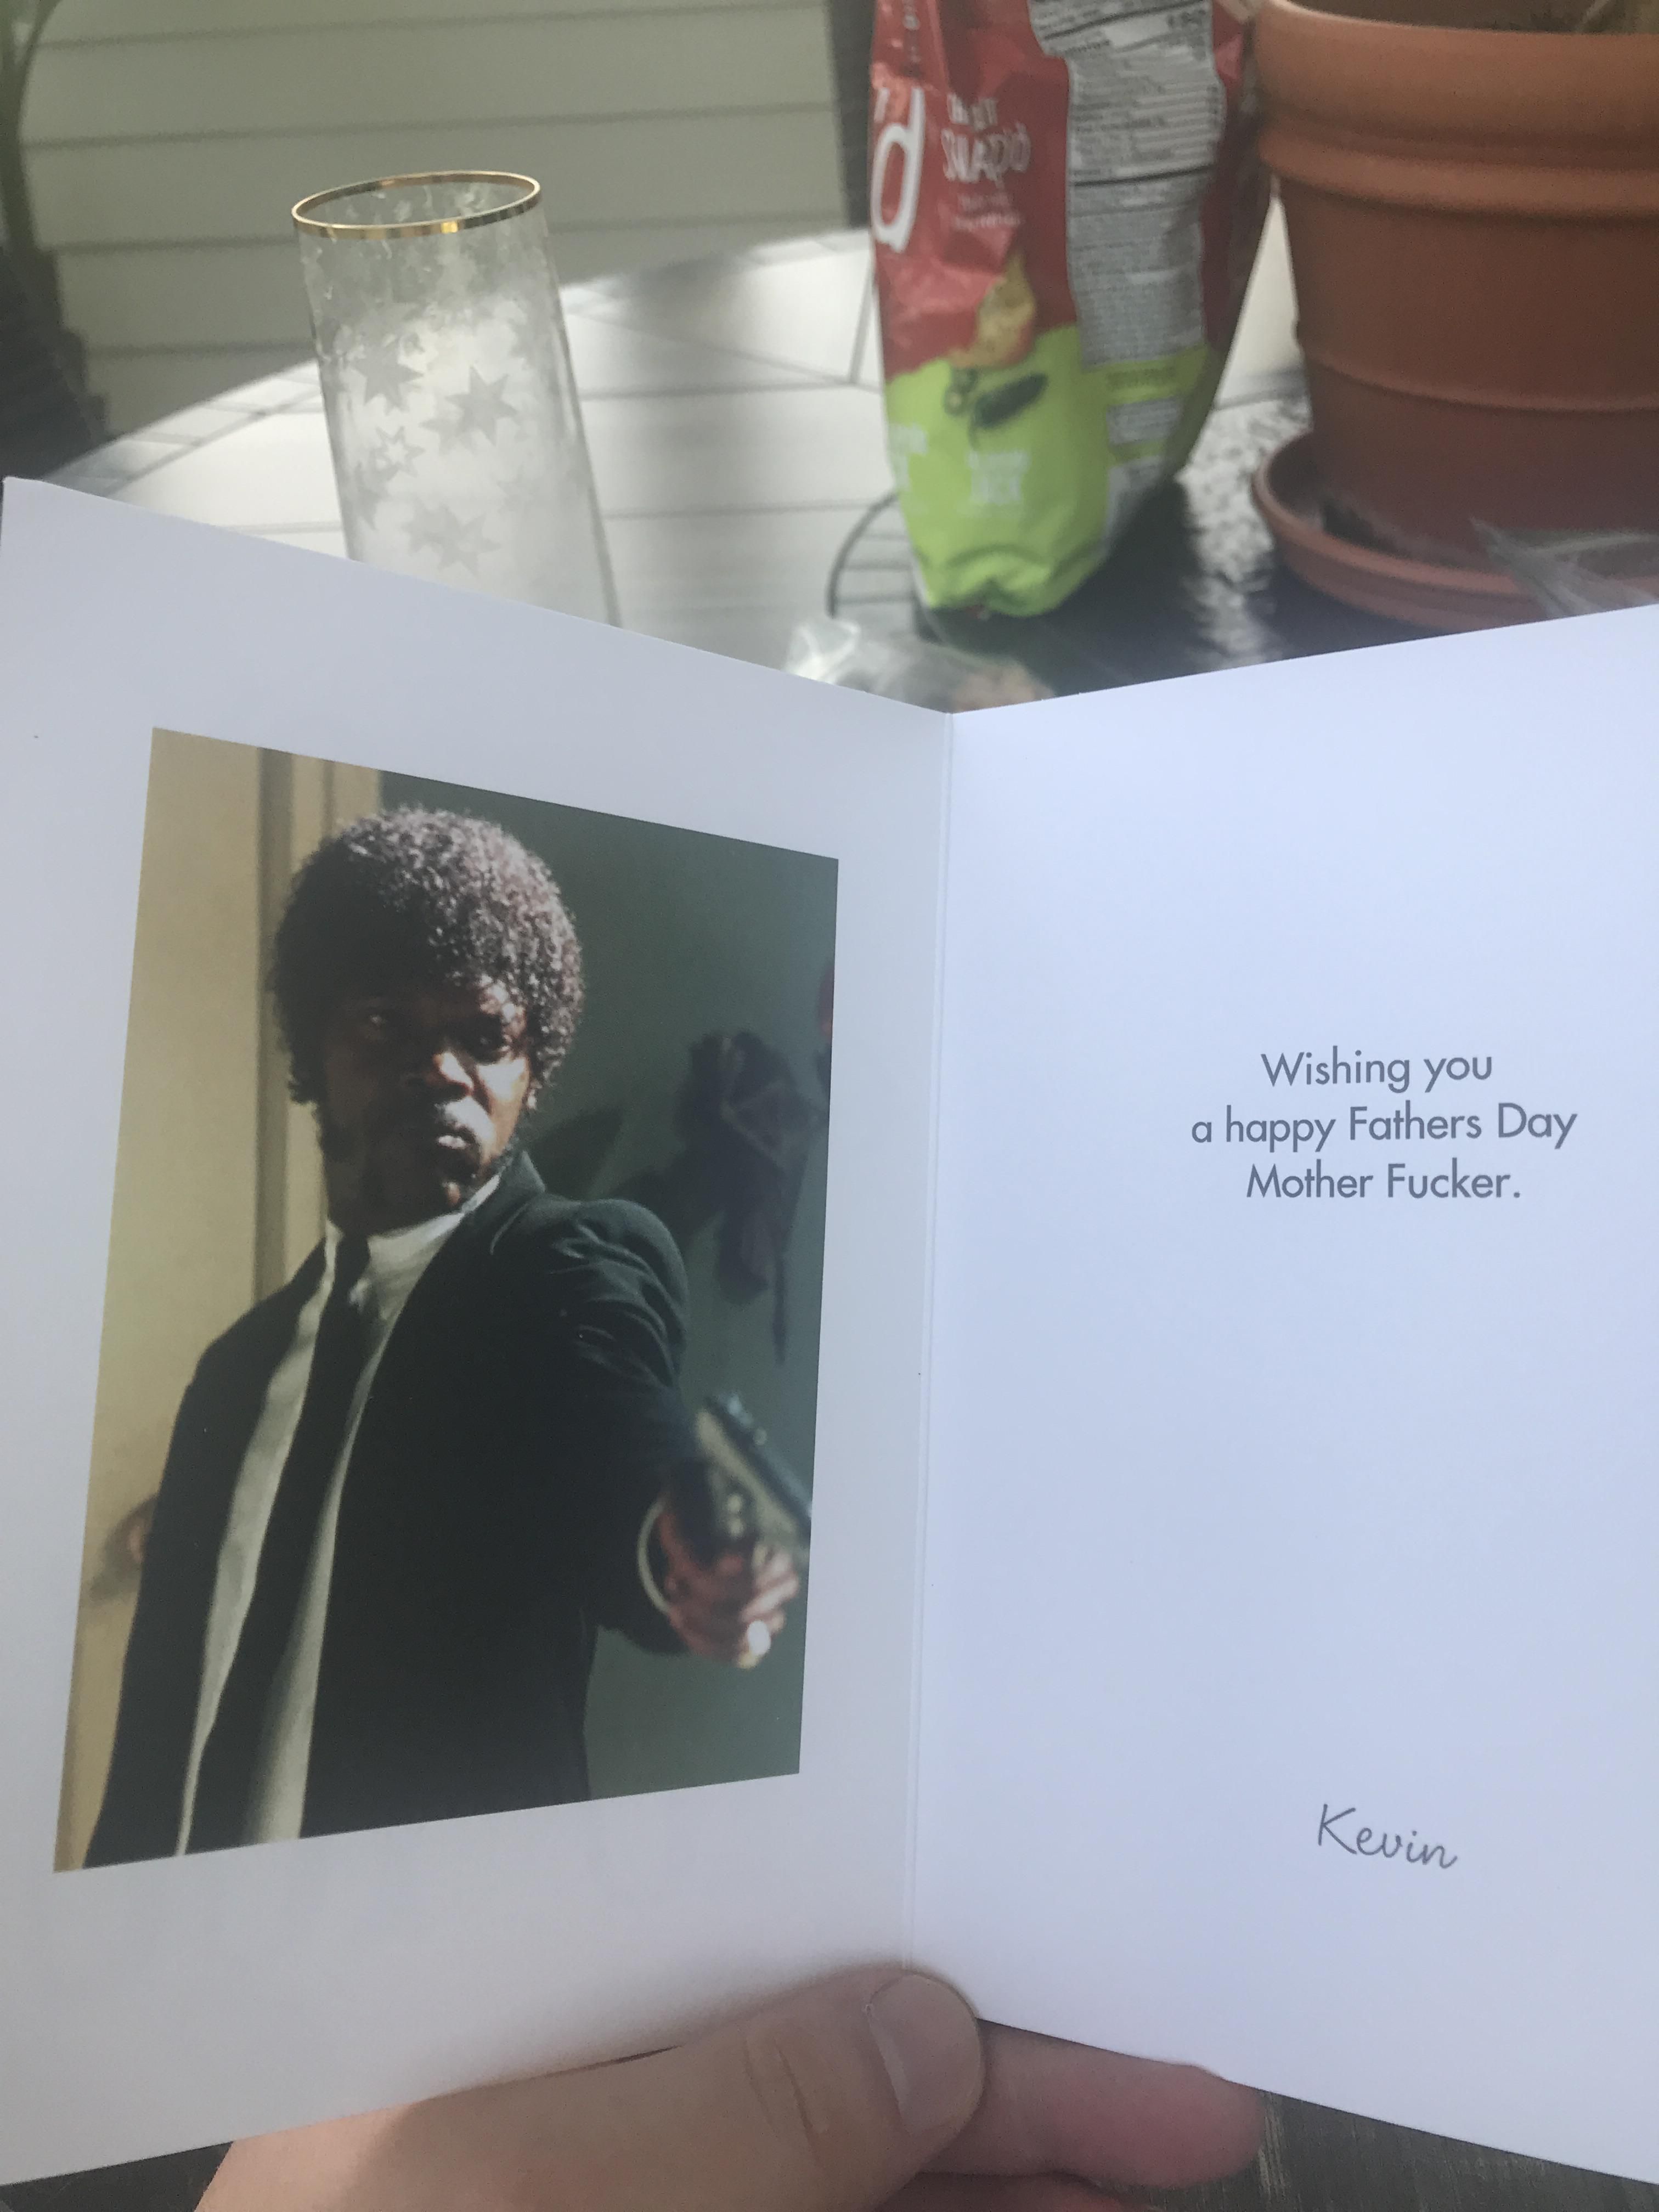 My dads Father’s Day card. I hope he likes it.